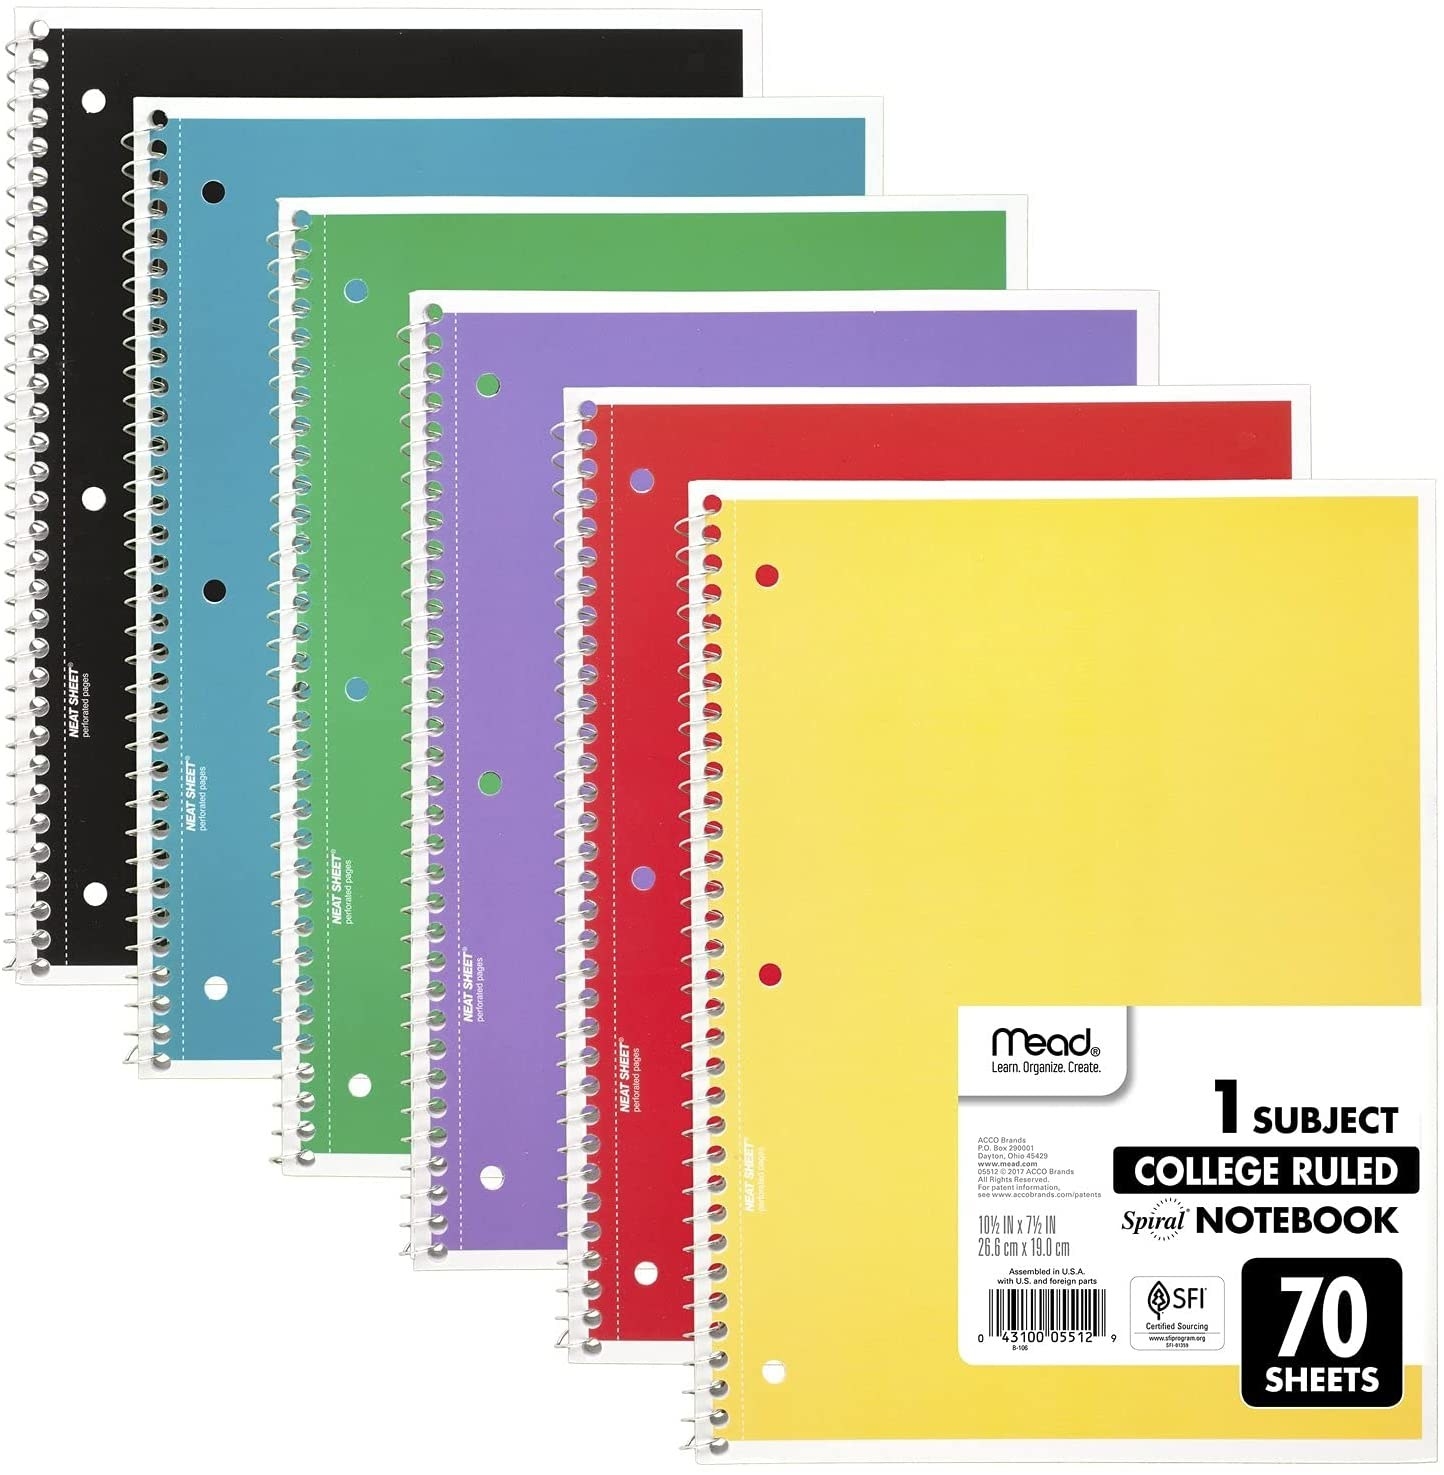 the notebook in black, blue, green, lavender, red, and yellow